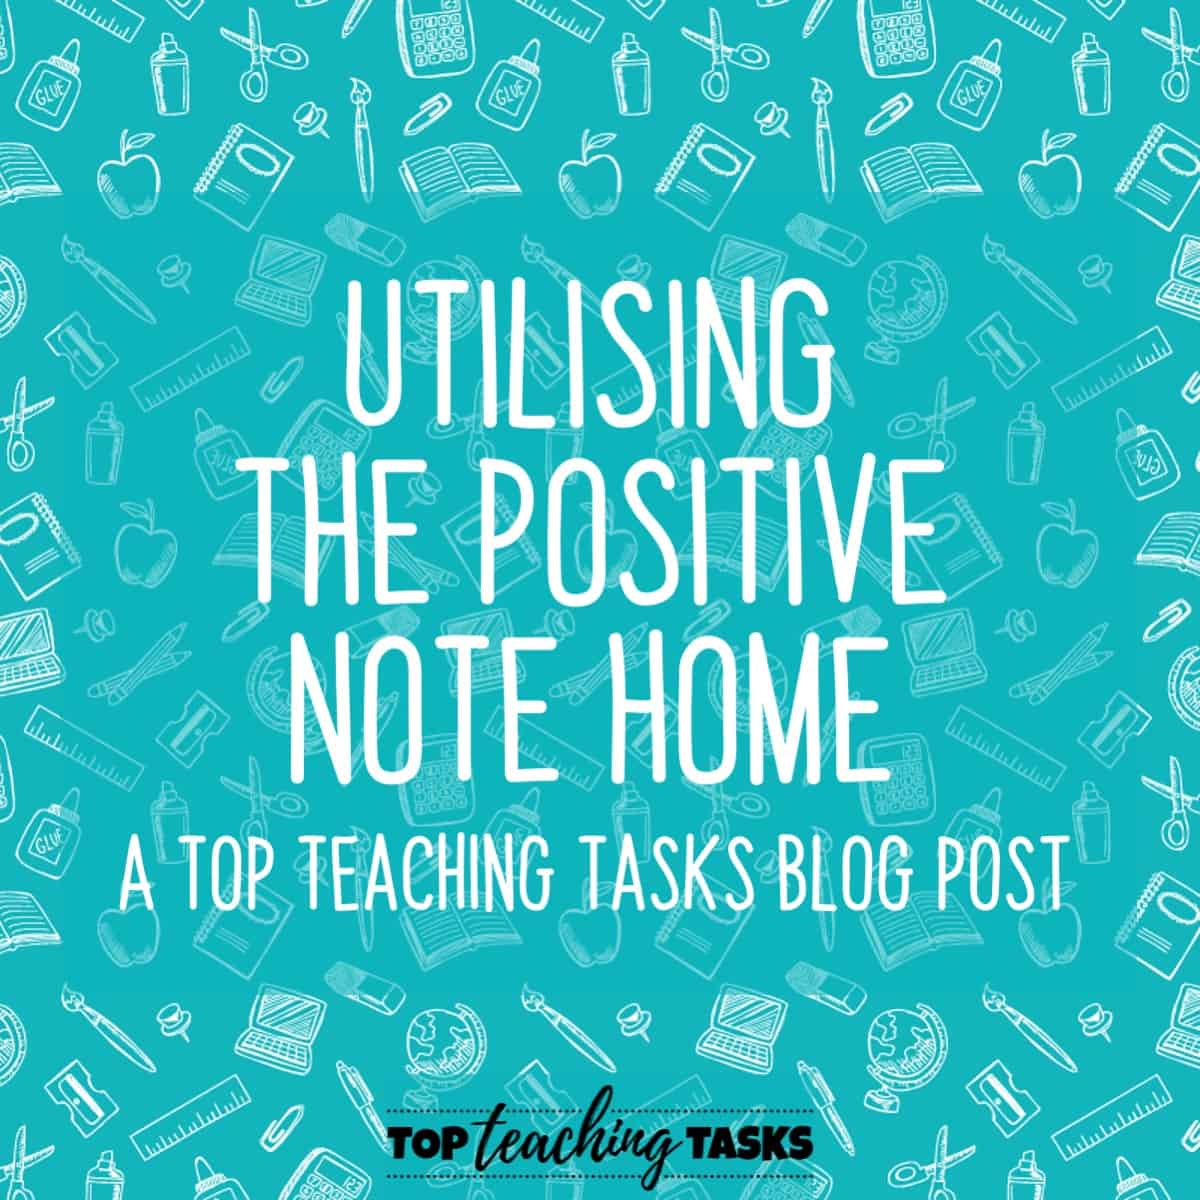 The Positive Note Home is a simple and effective way to encourage positive communication between school and home. Communication is key! One way to promote positive communication between school and home is by sending home simple and brief positive notes. Positive notes are also short and sweet so they are not a huge time commitment. The blog post also features a great freebie.